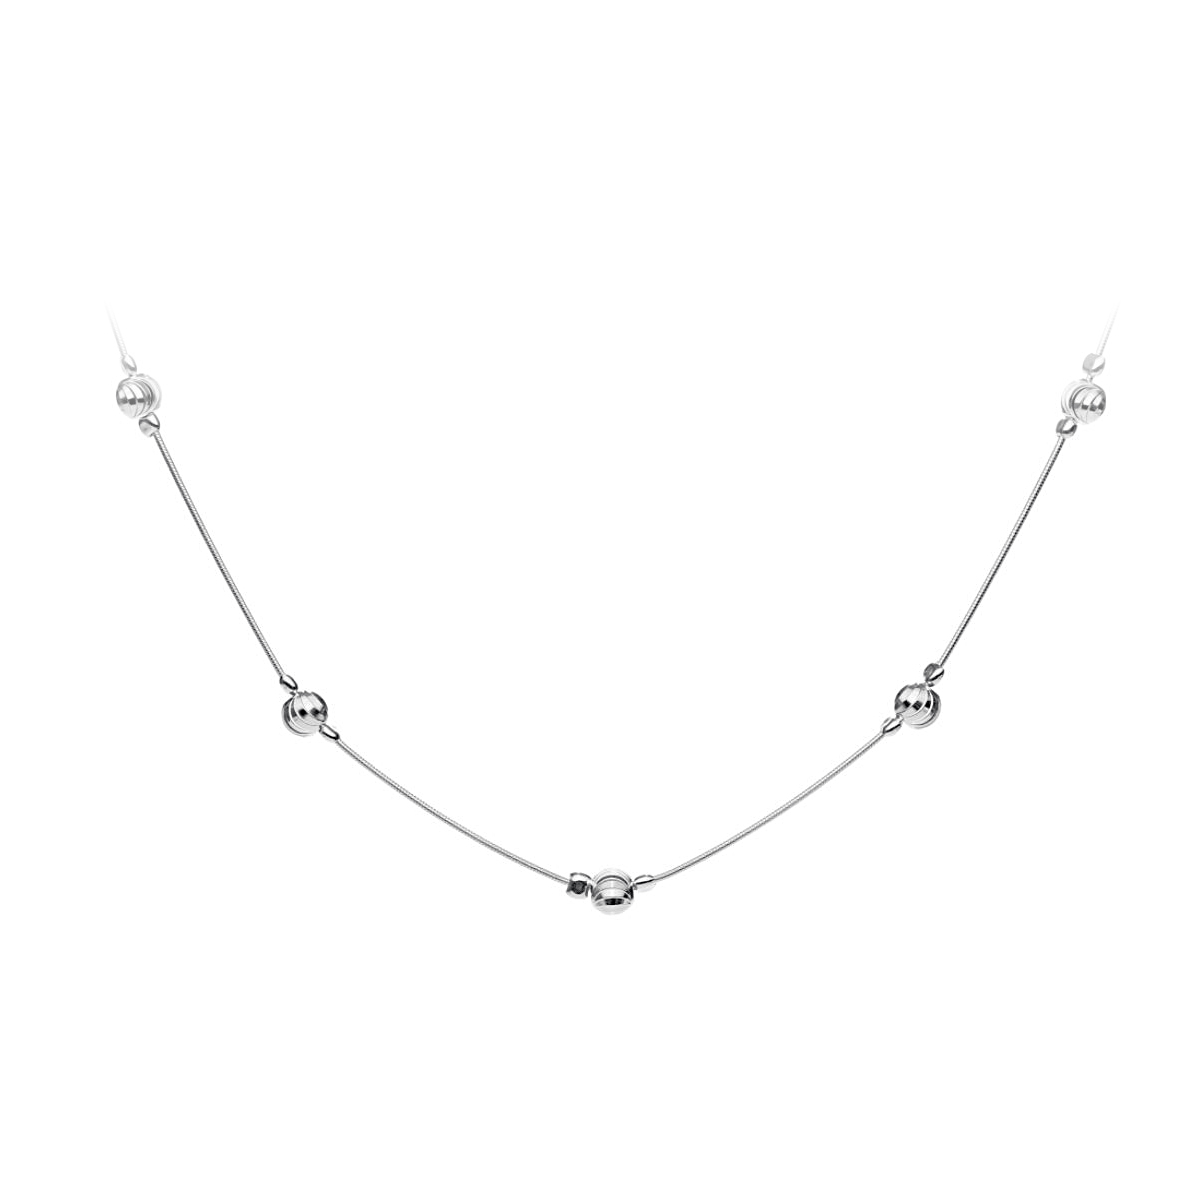 Sterling Silver Single Strand Necklace With 5 Round Bead Stations Measuring 18 Inches.